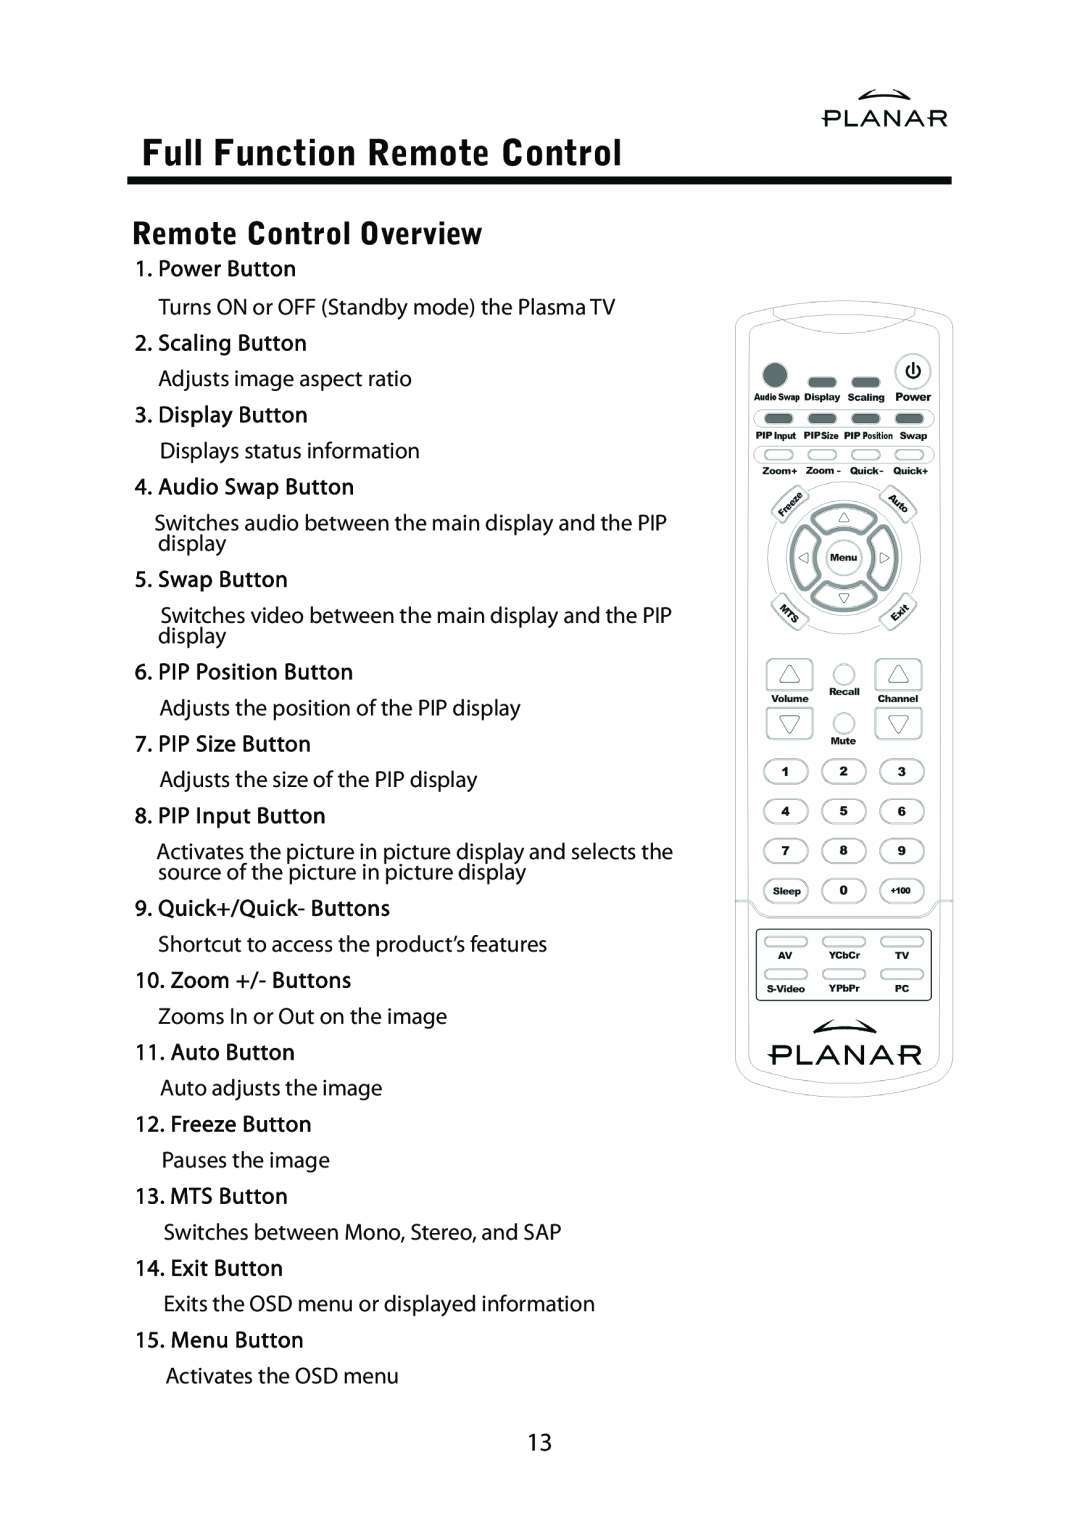 Planar PD42ED manual Full Function Remote Control, Remote Control Overview, Power Button, Scaling Button, Display Button 